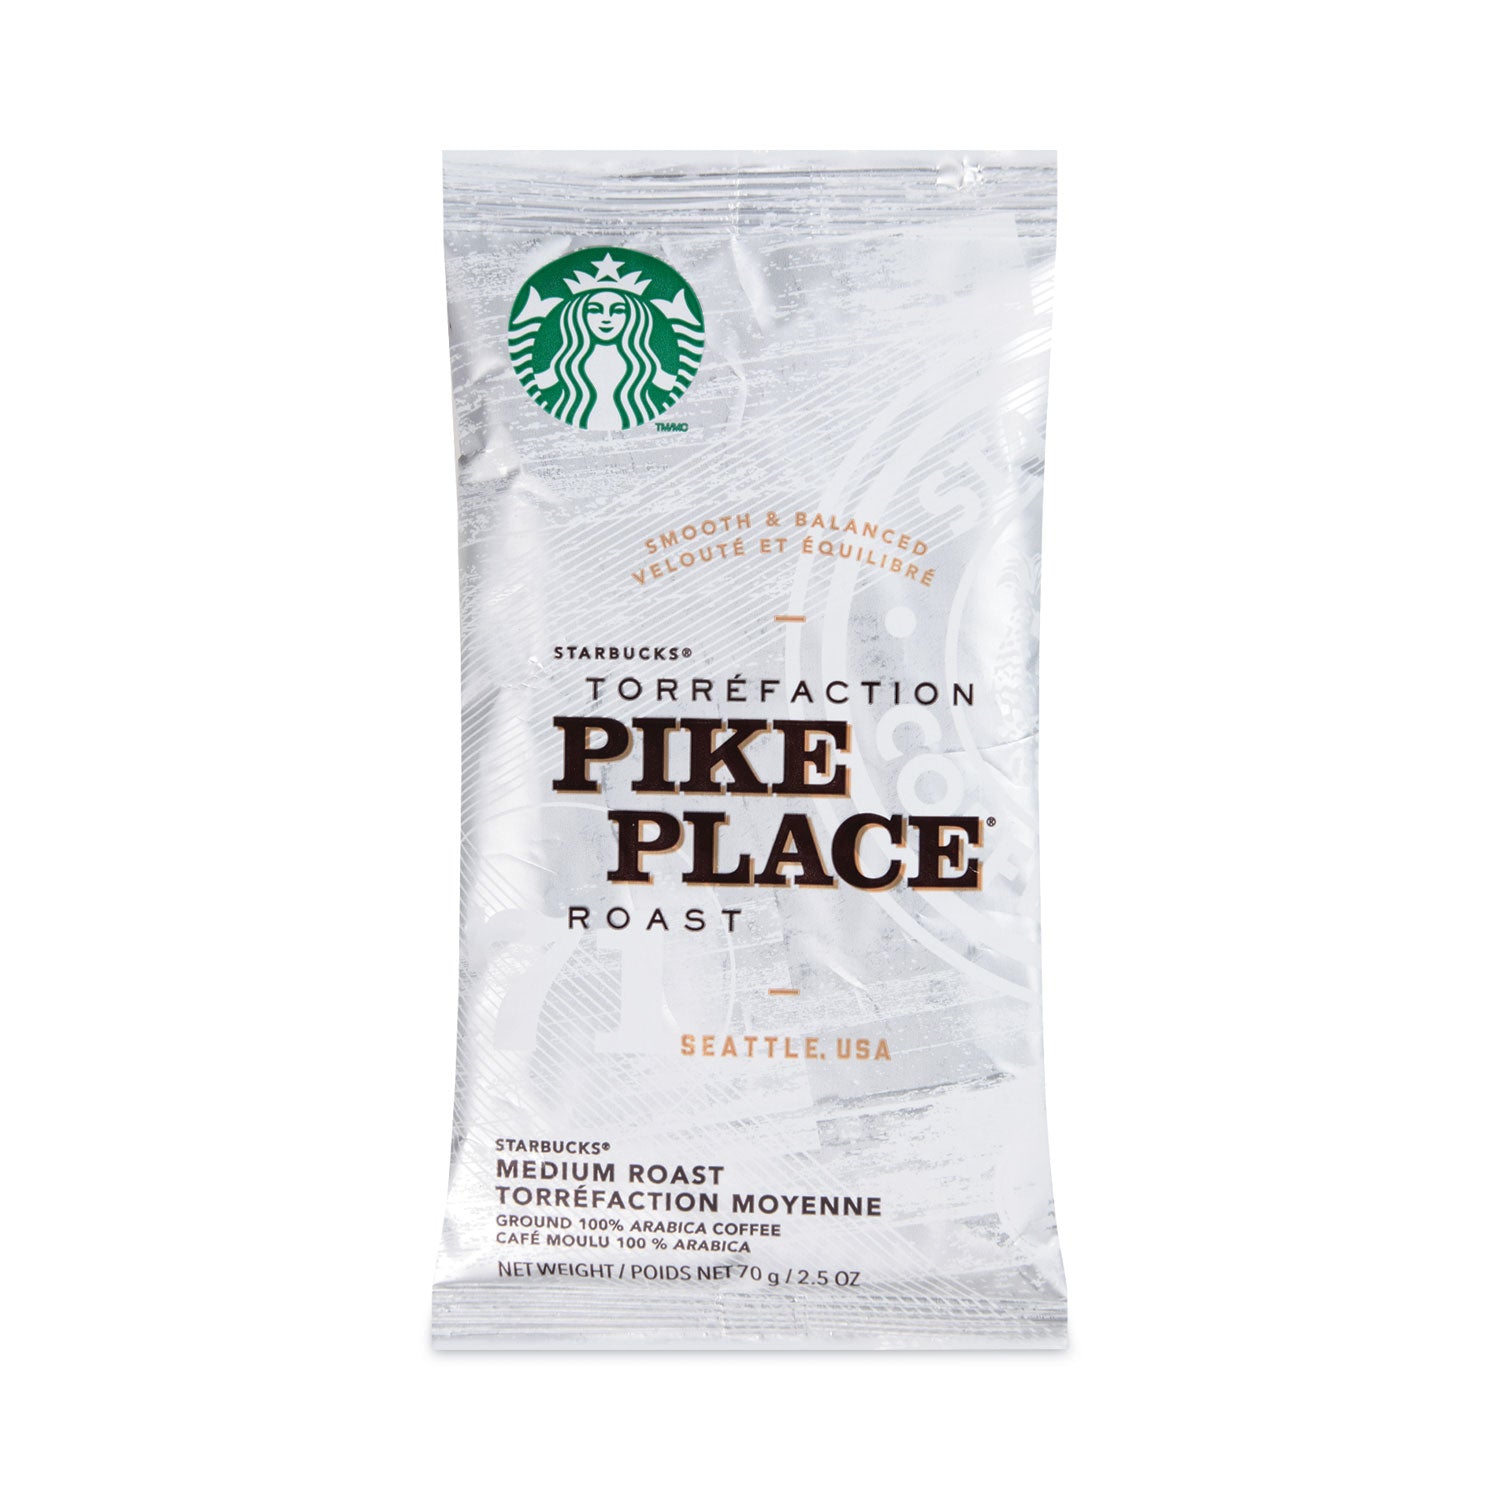 coffee-pike-place-27-oz-packet-72-carton_sbk11018197ct - 1